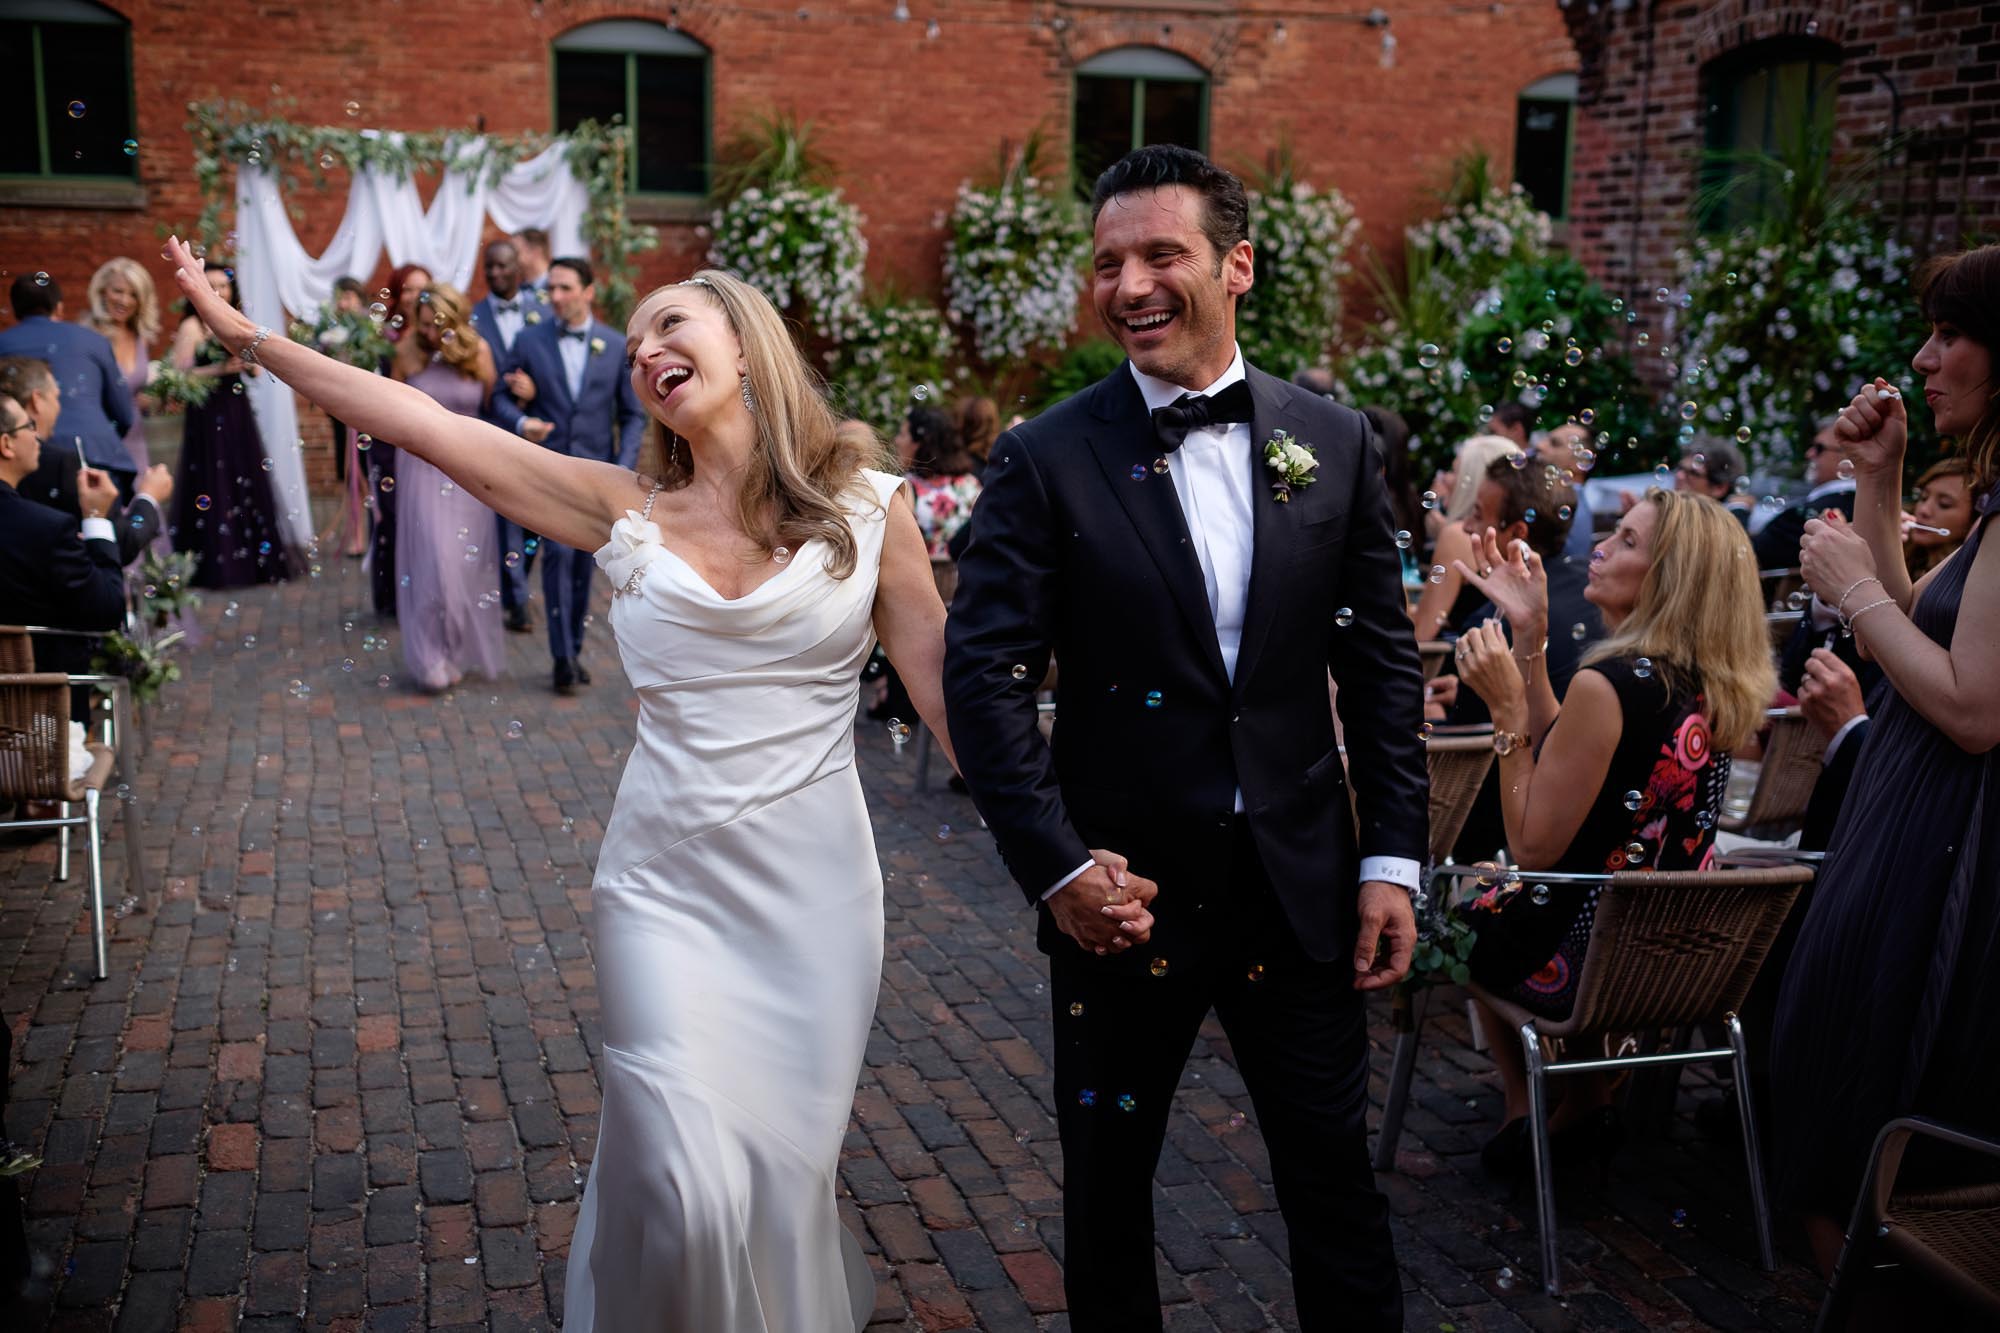  the bride and groom dance their way down the aisle after their wedding ceremony at Archeo in Toronto's Distillery District. 